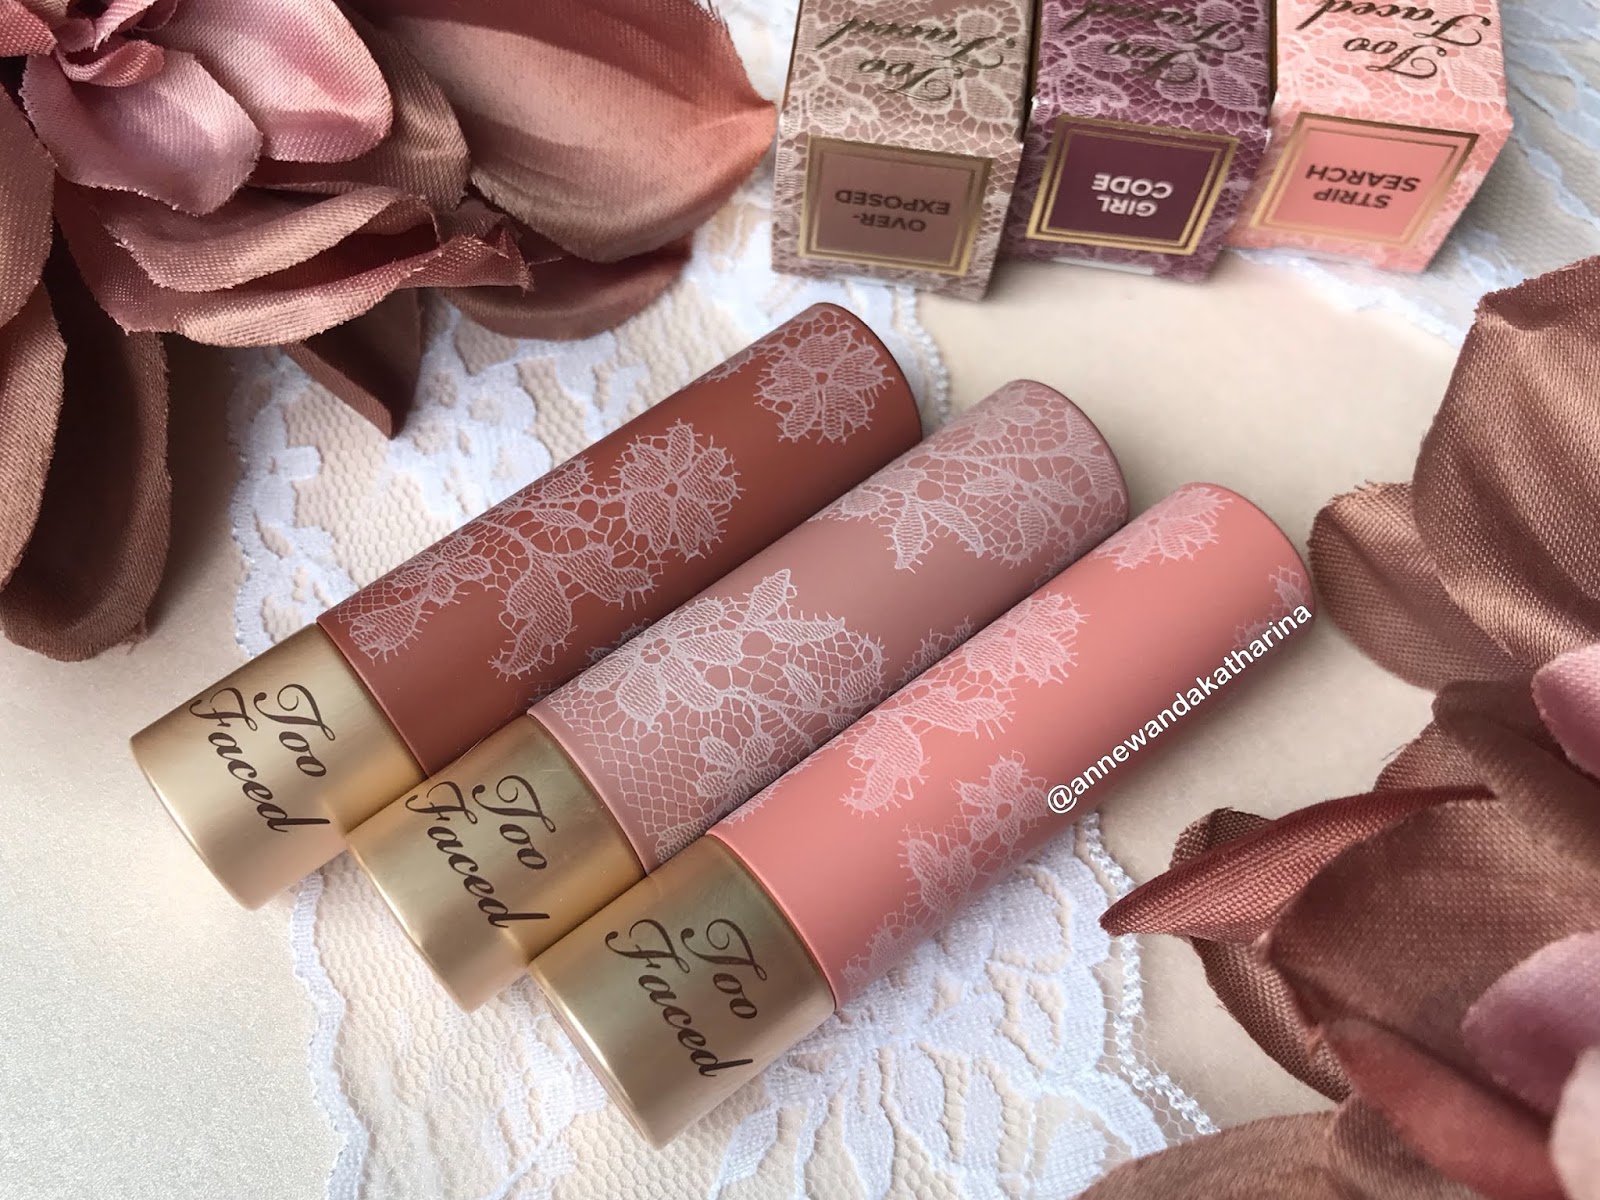 Too Faced Natural Nudes Lipsticks.